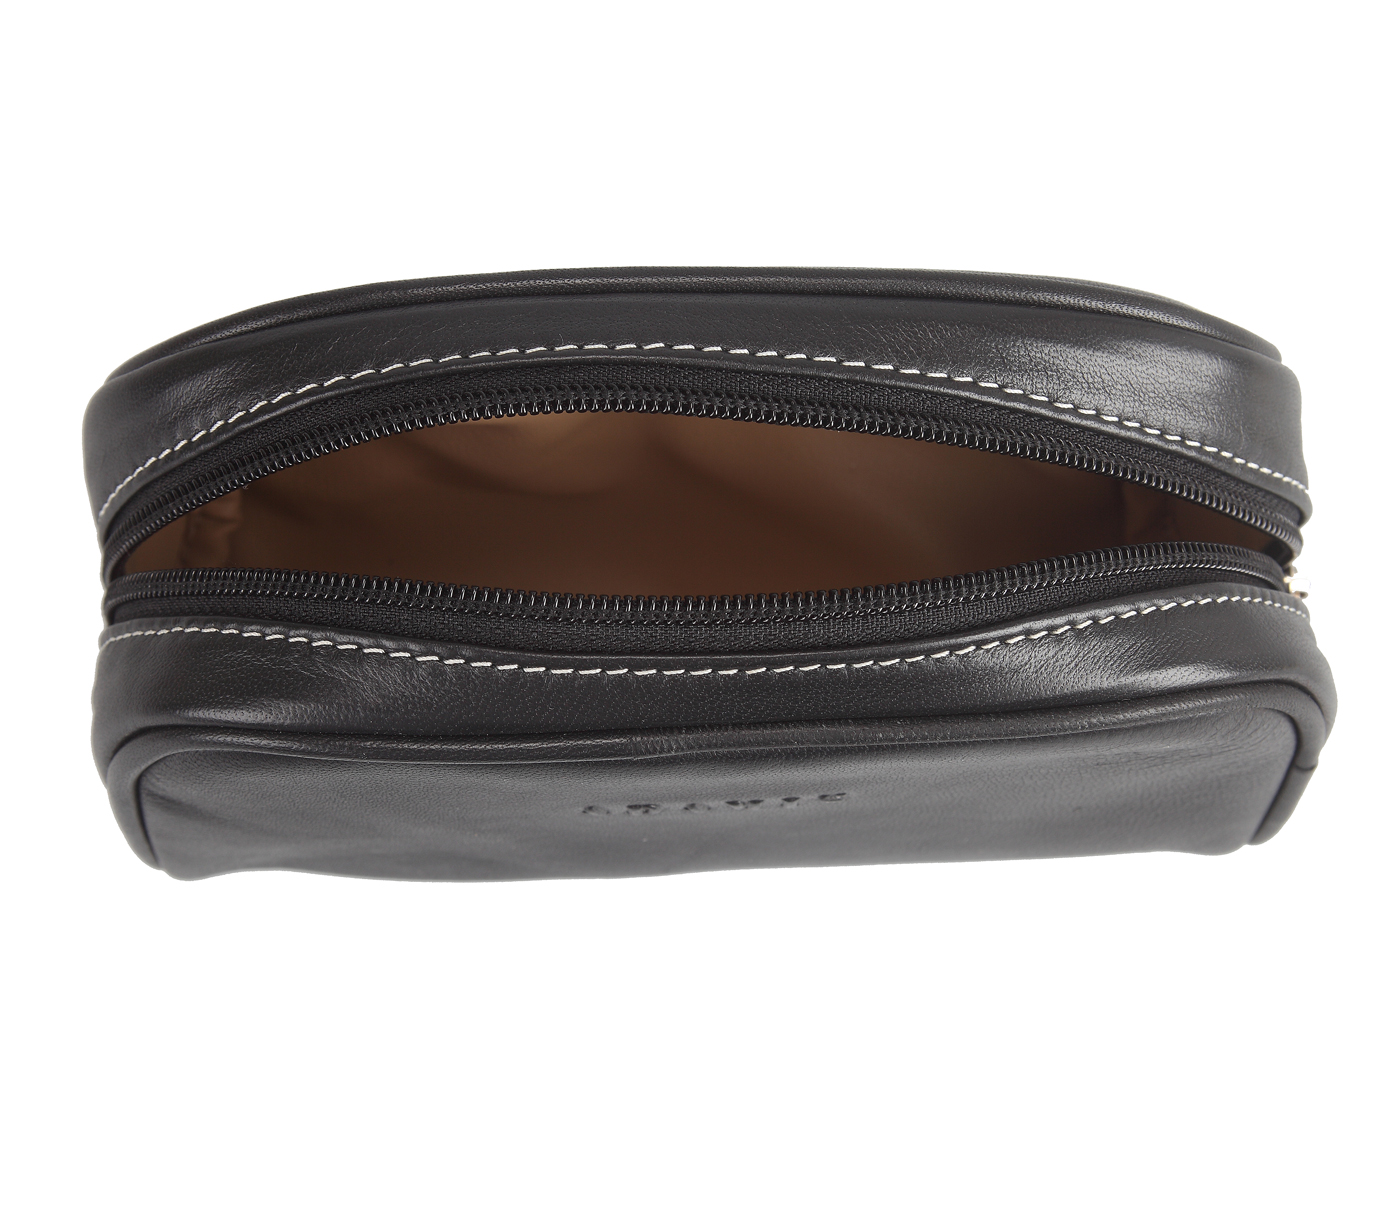 SC4S--Unisex Wash & Toiletry travel Bag in Genuine Leather - Black